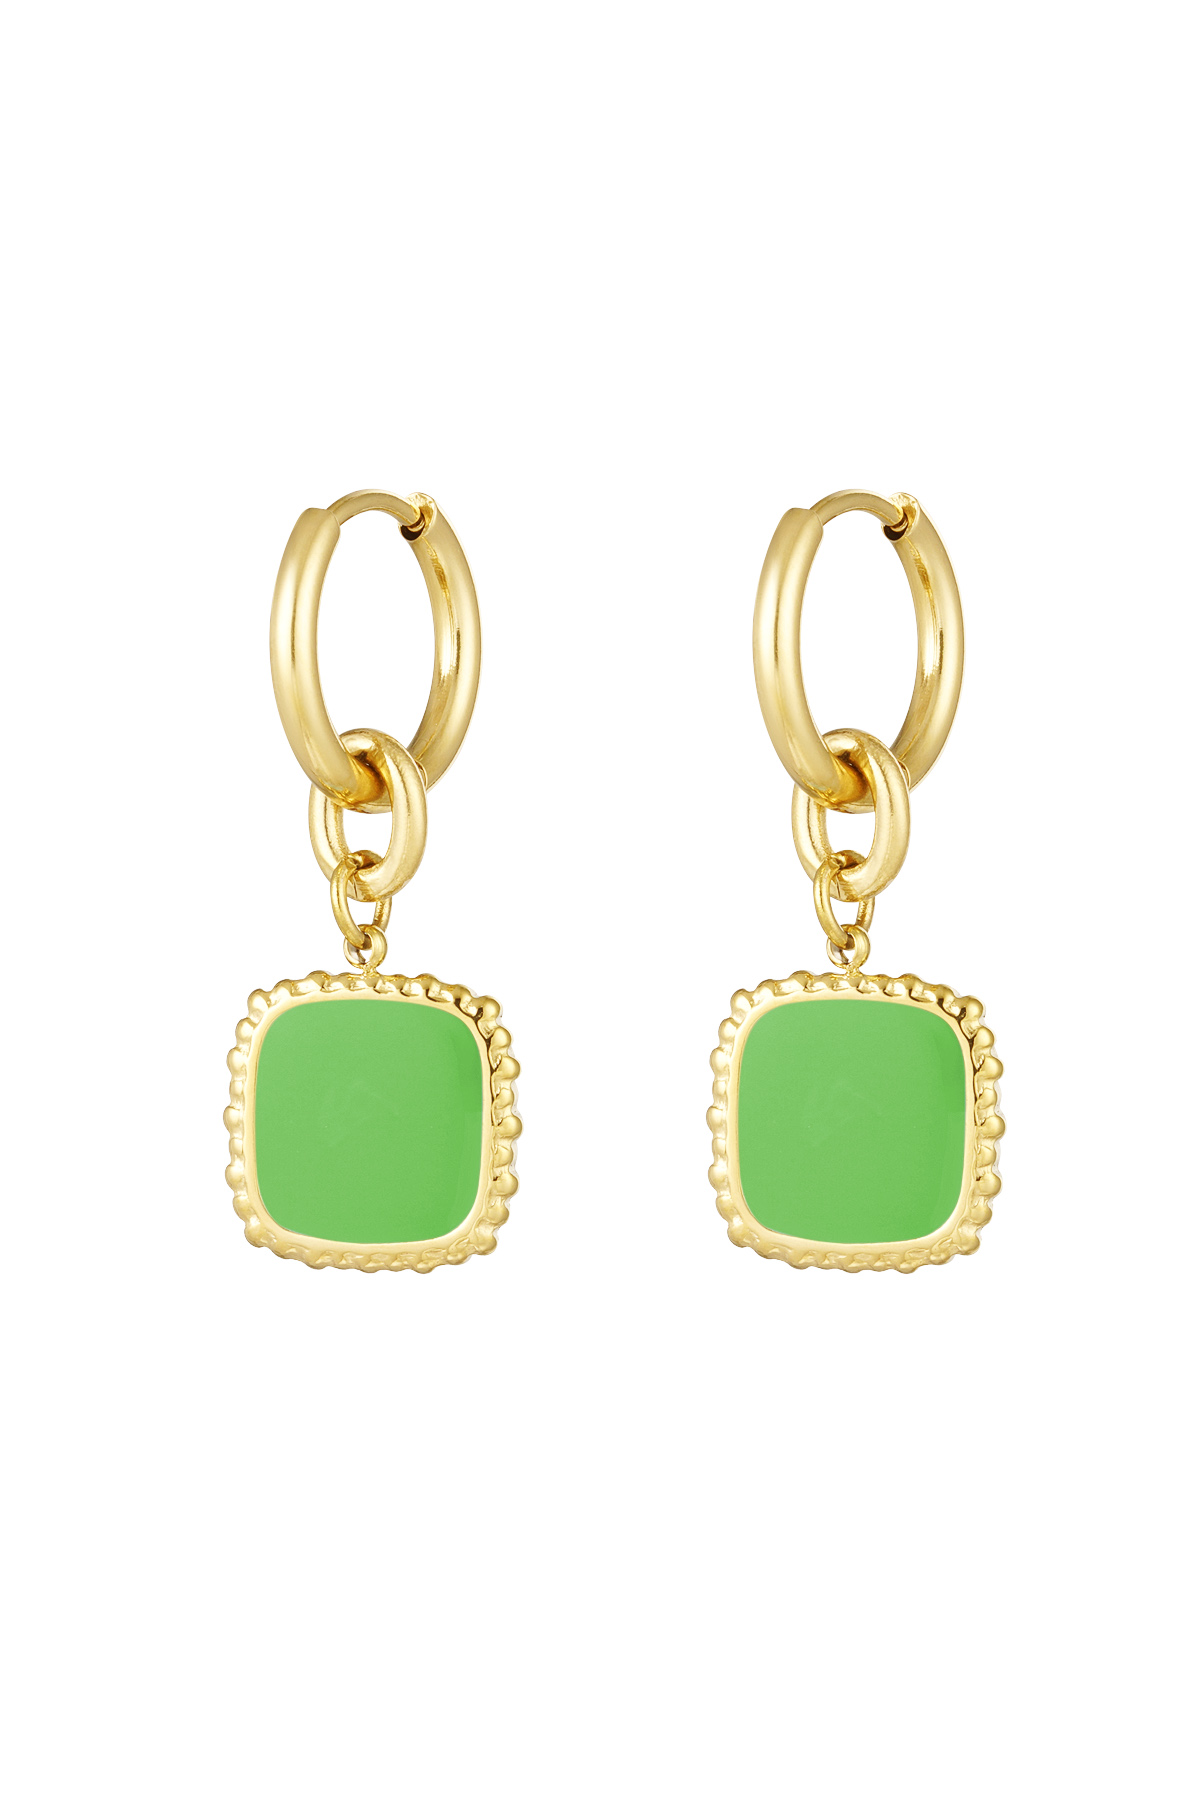 earrings with square pendant green - gold